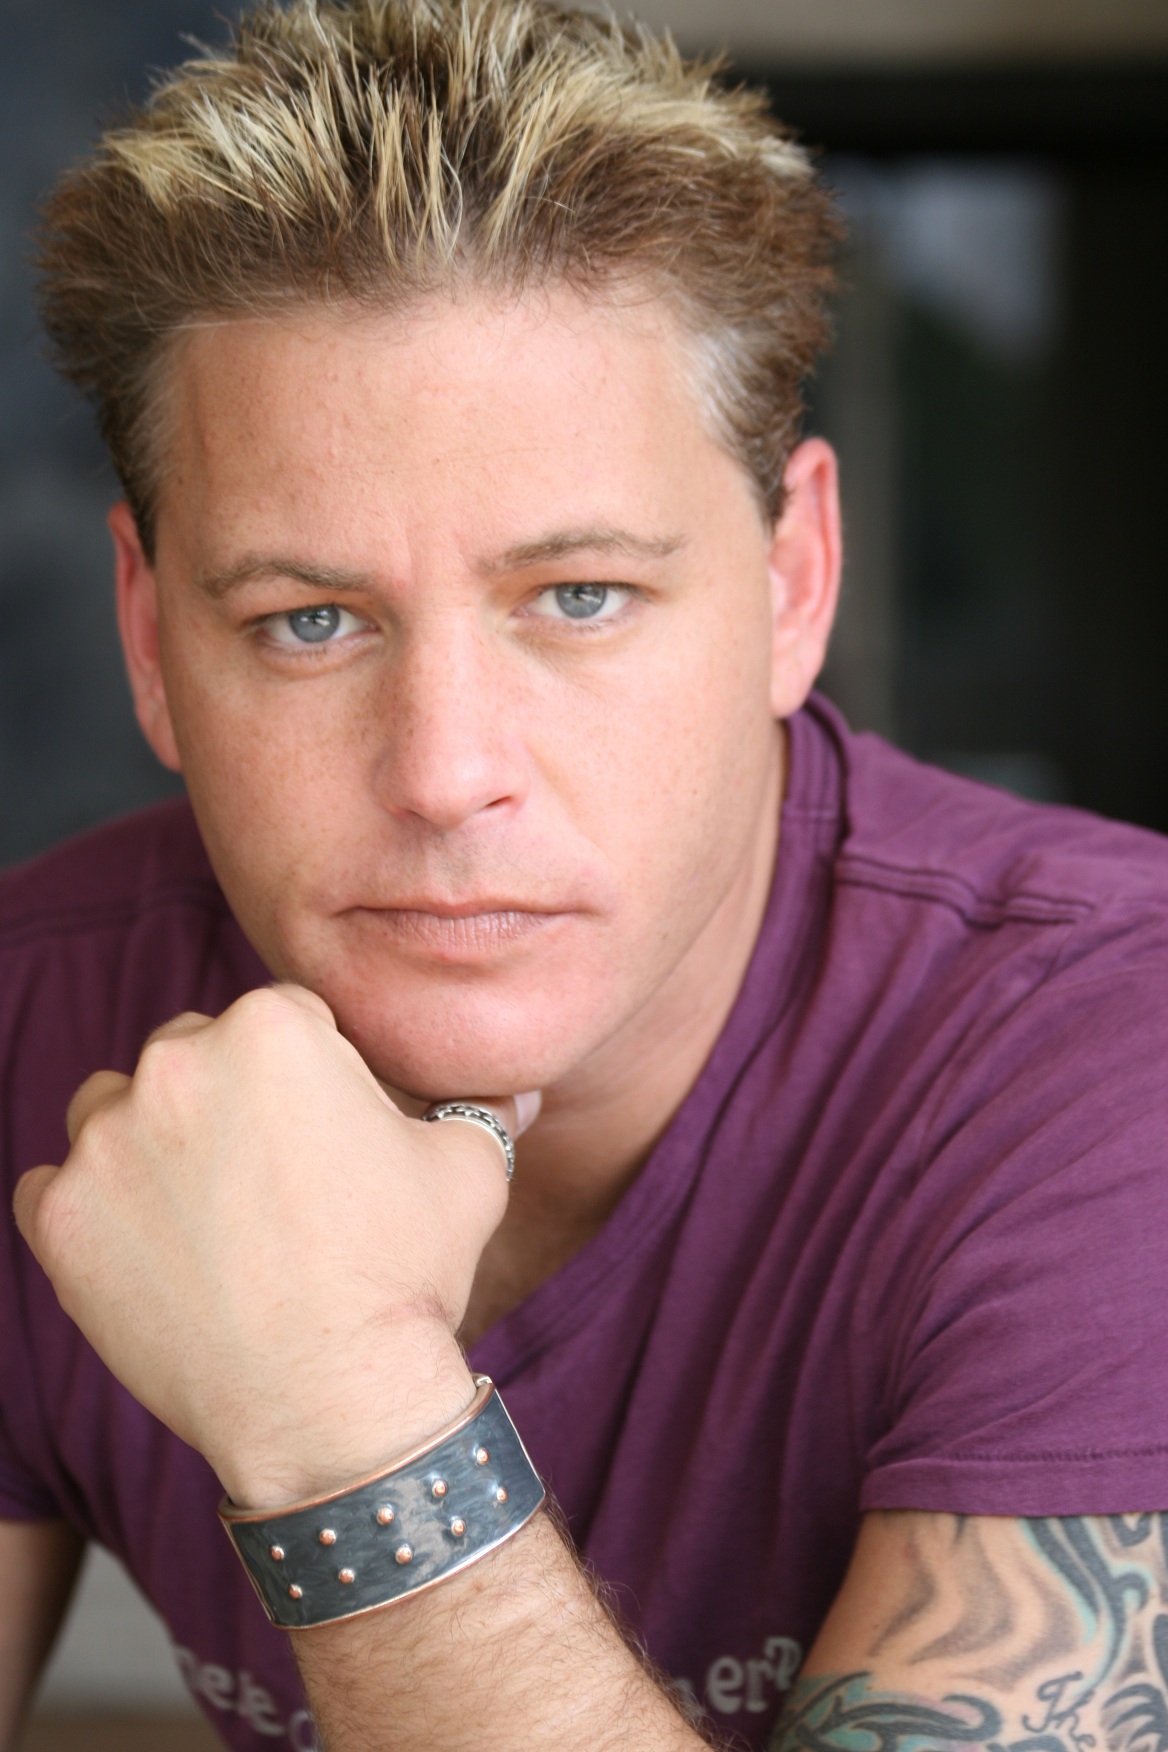 one of the final pictures of the late Corey Haim